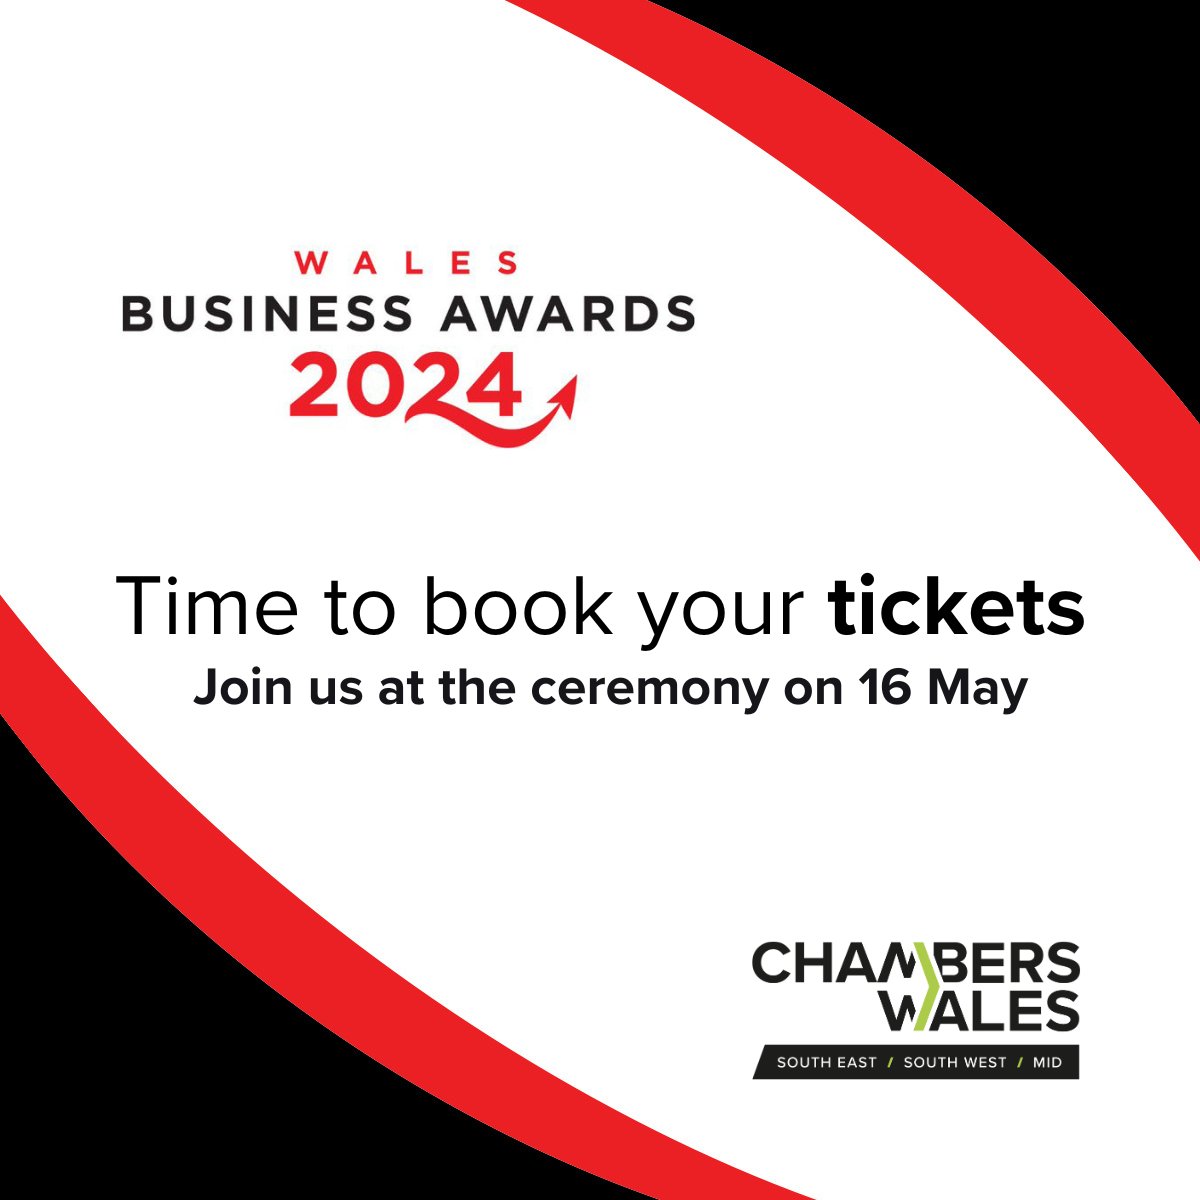 Have you booked your place yet?

Join us on 16 May at @TheValeResort to celebrate the very best of businesses across Wales.

Buy your ticket now for the #WalesBusinessAwards2024: cw-seswm.com/news/wales-bus…